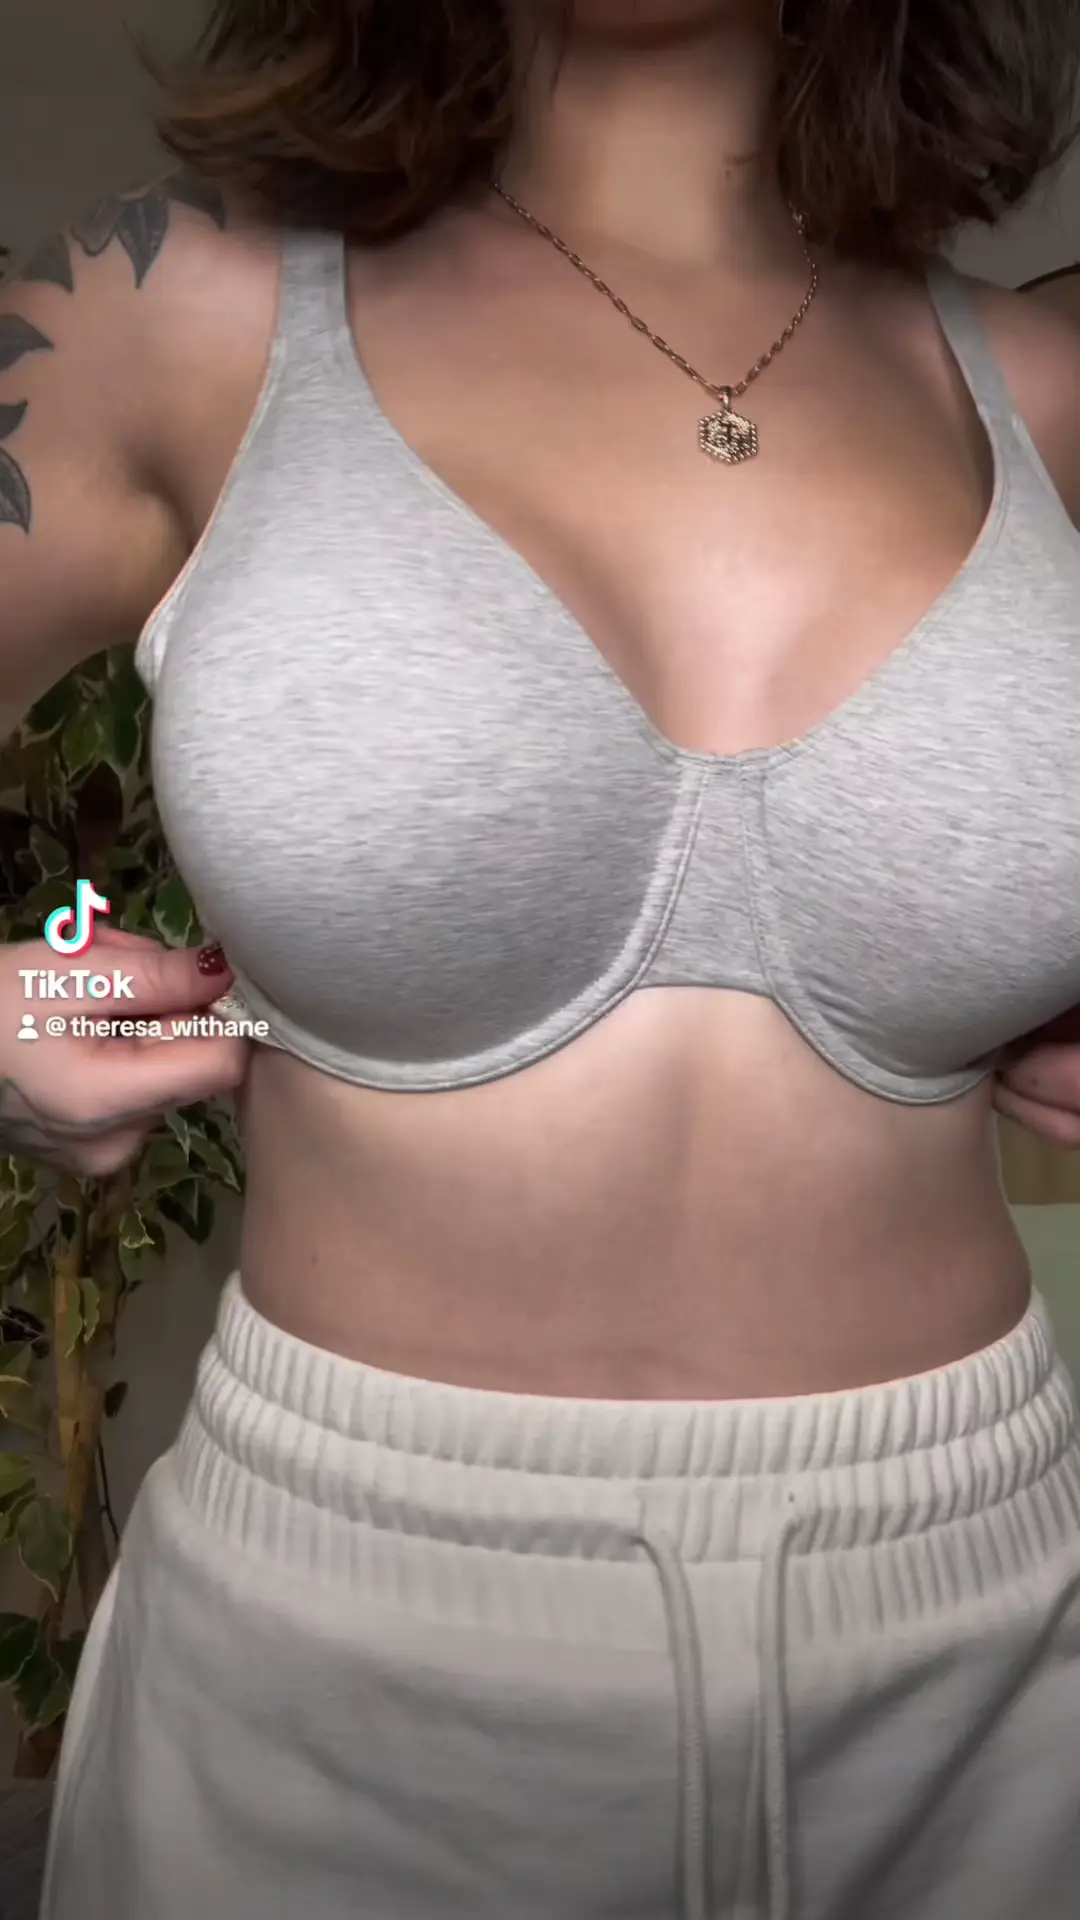 Bras for large busts, Video published by Therese S